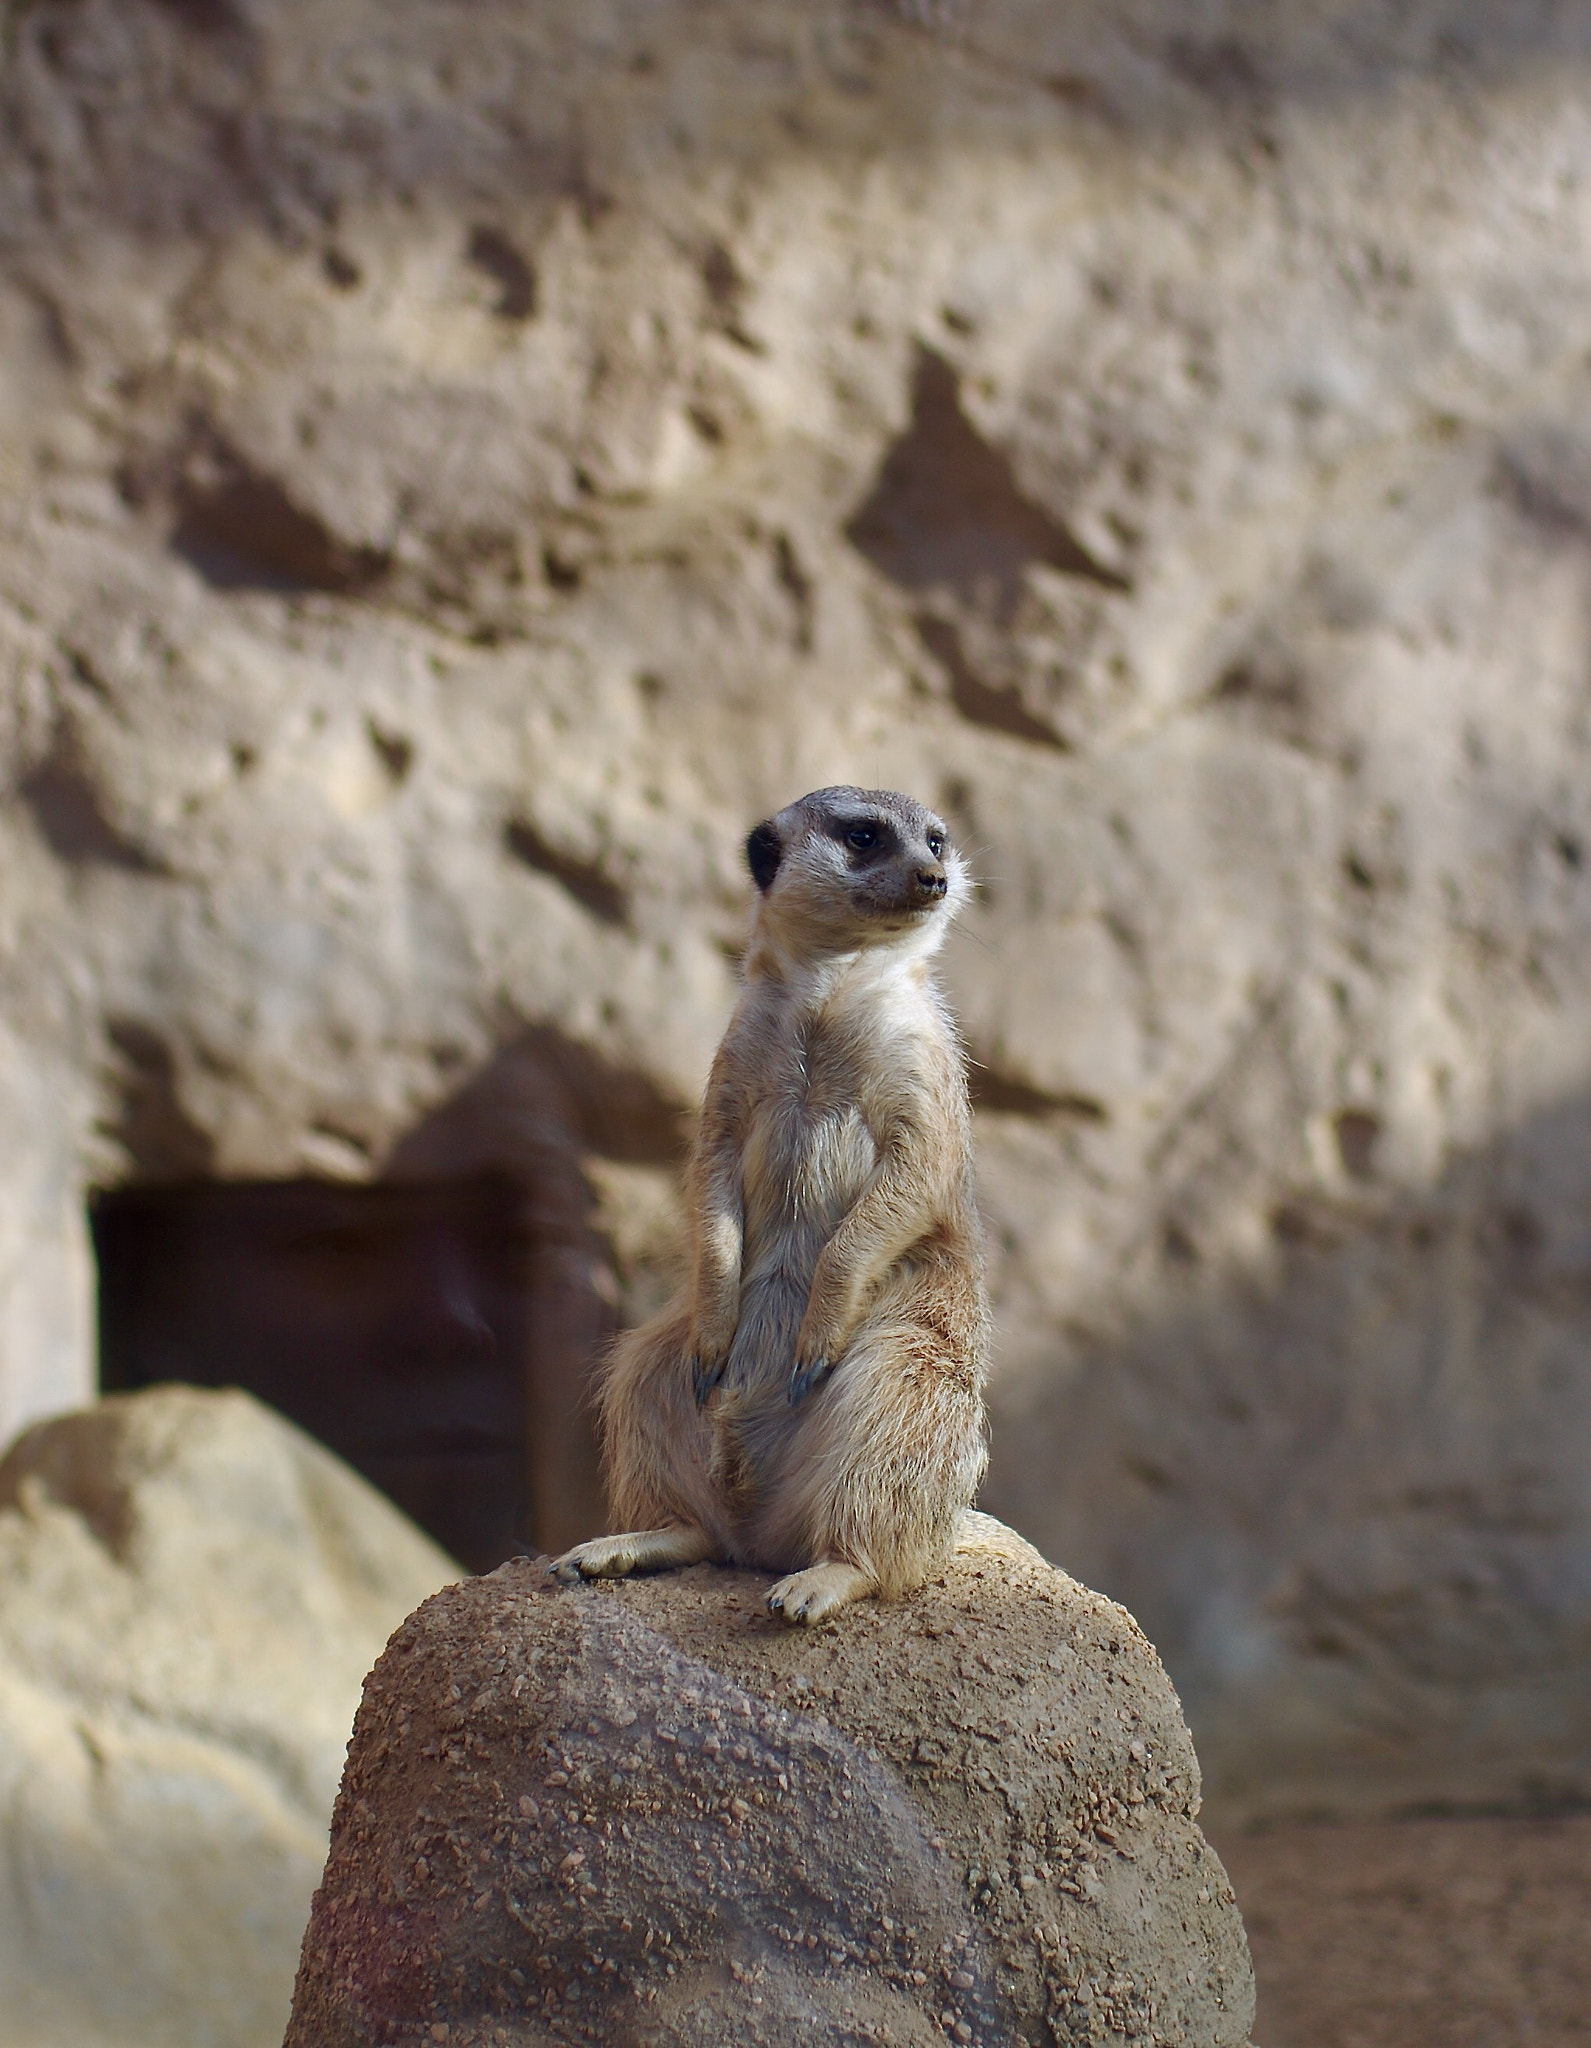 Pentax K-5 + Pentax smc FA 43mm F1.9 Limited sample photo. Meerkat at indy zoo photography